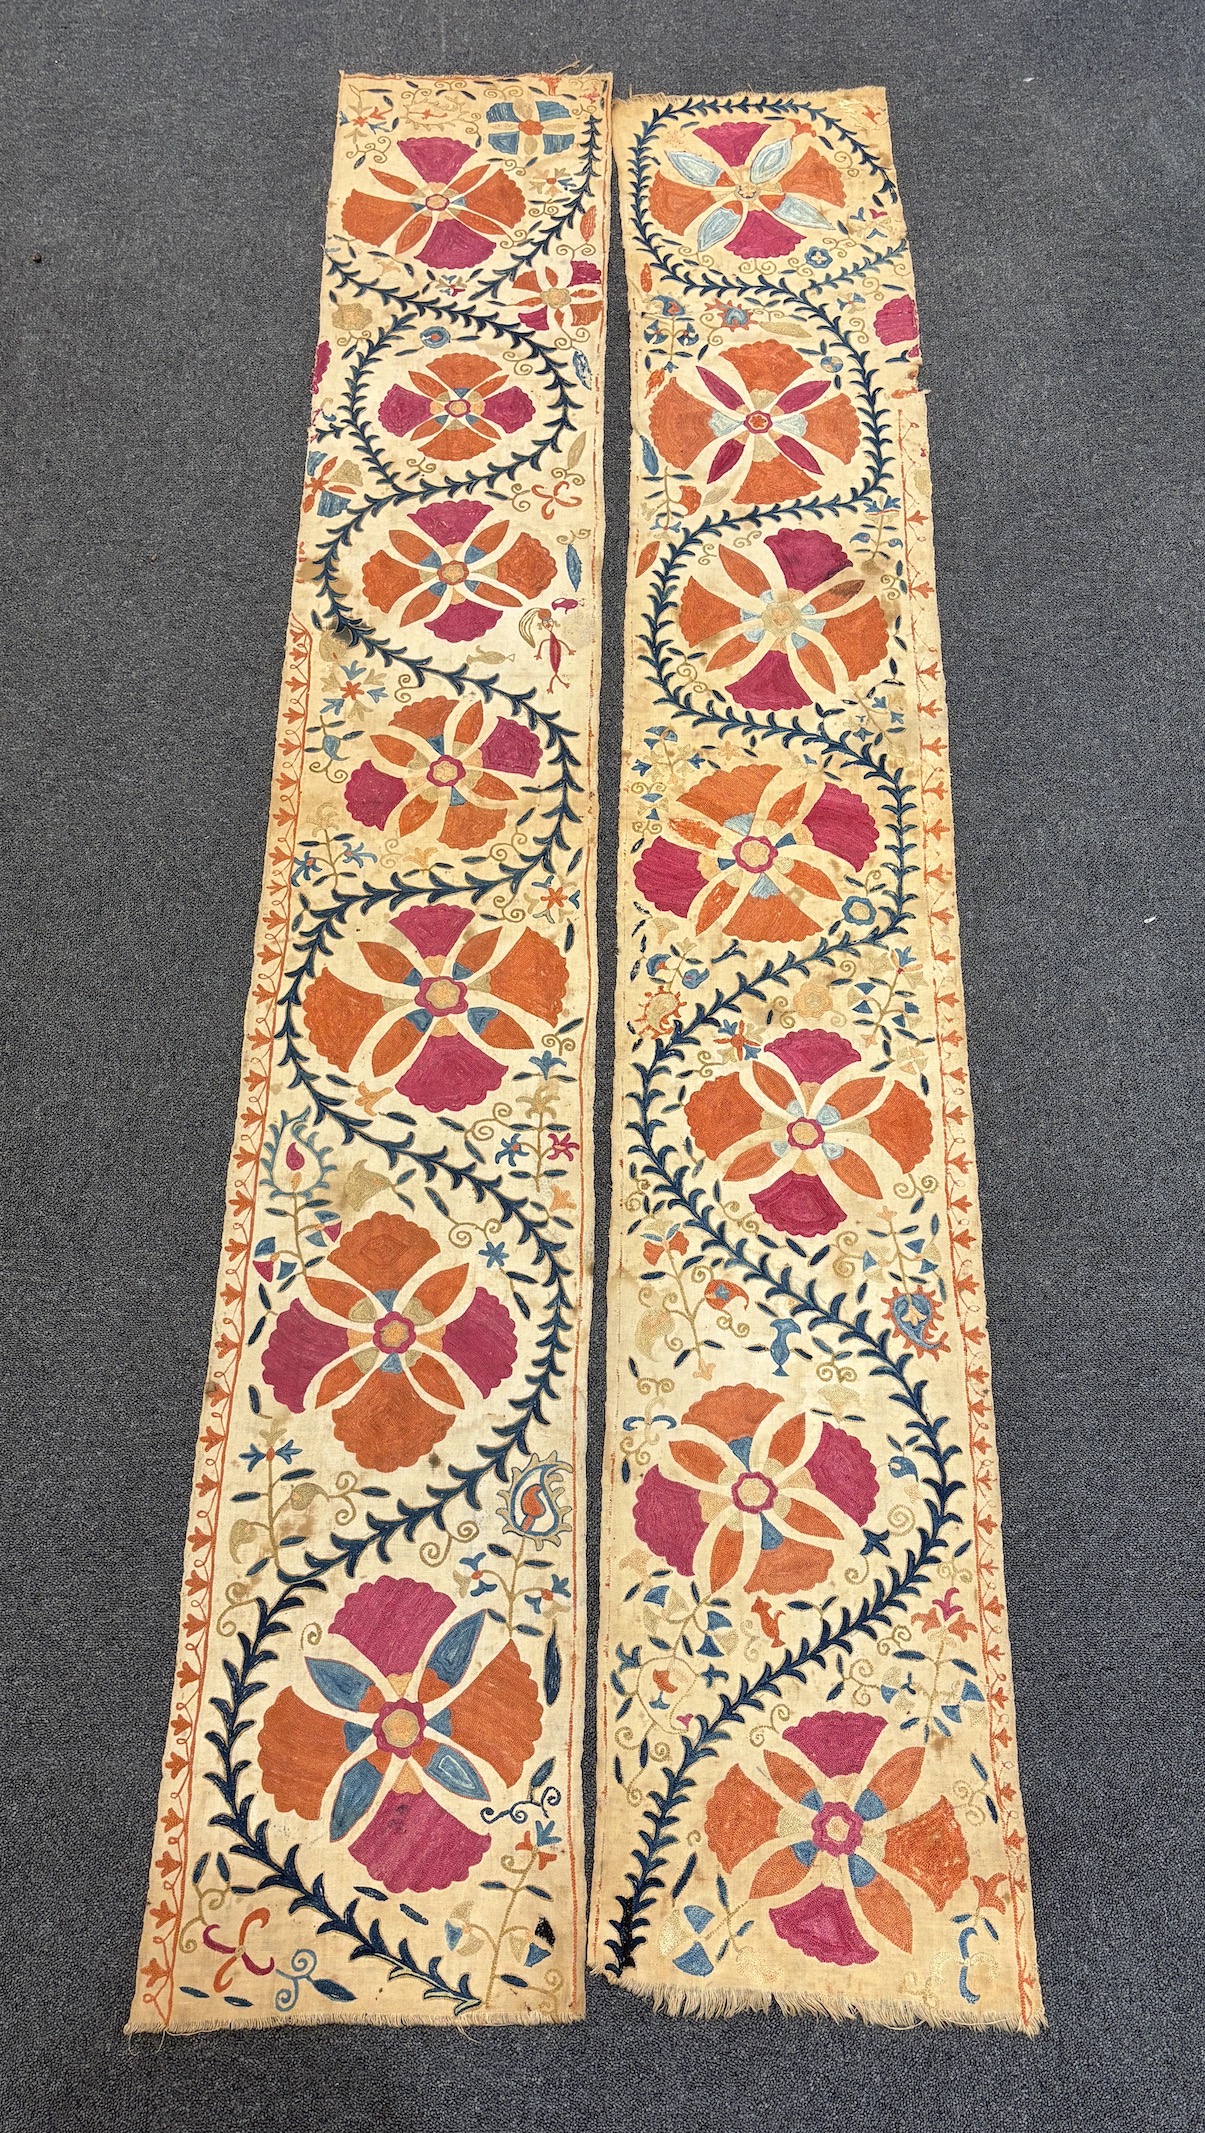 A pair of Uzbekistan long wide panels, both embroidered in mostly red, coral and blue with large symbolic flowers and trailing vines on woven cotton using mostly Burkara couching, longest 250cm long x 38cm wide